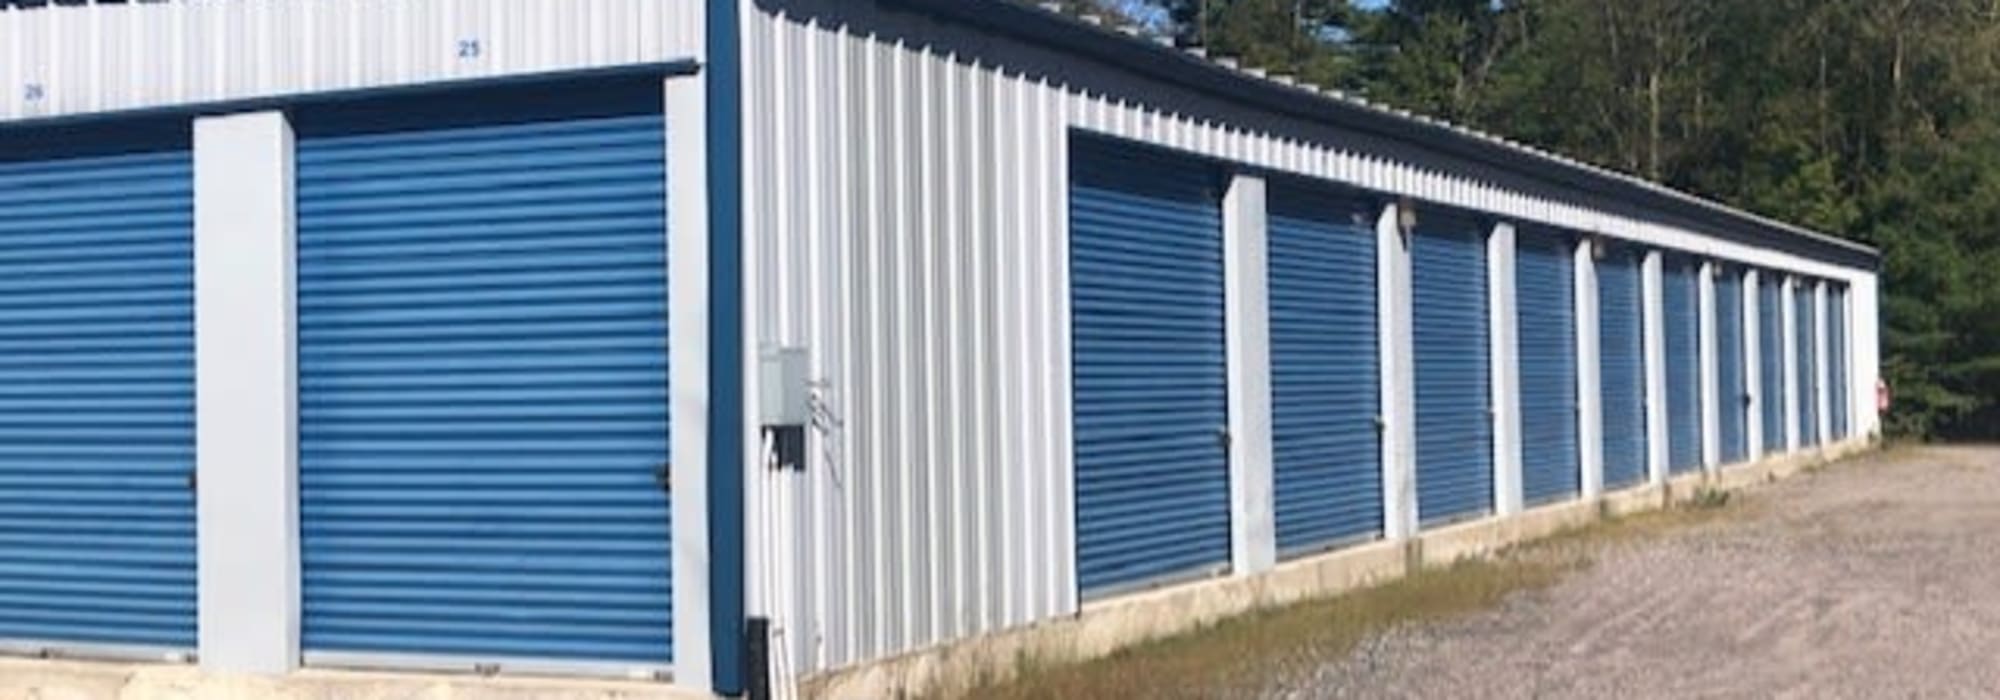 Outdoor units at Apple Self Storage - Port Carling in Port Carling, Ontario